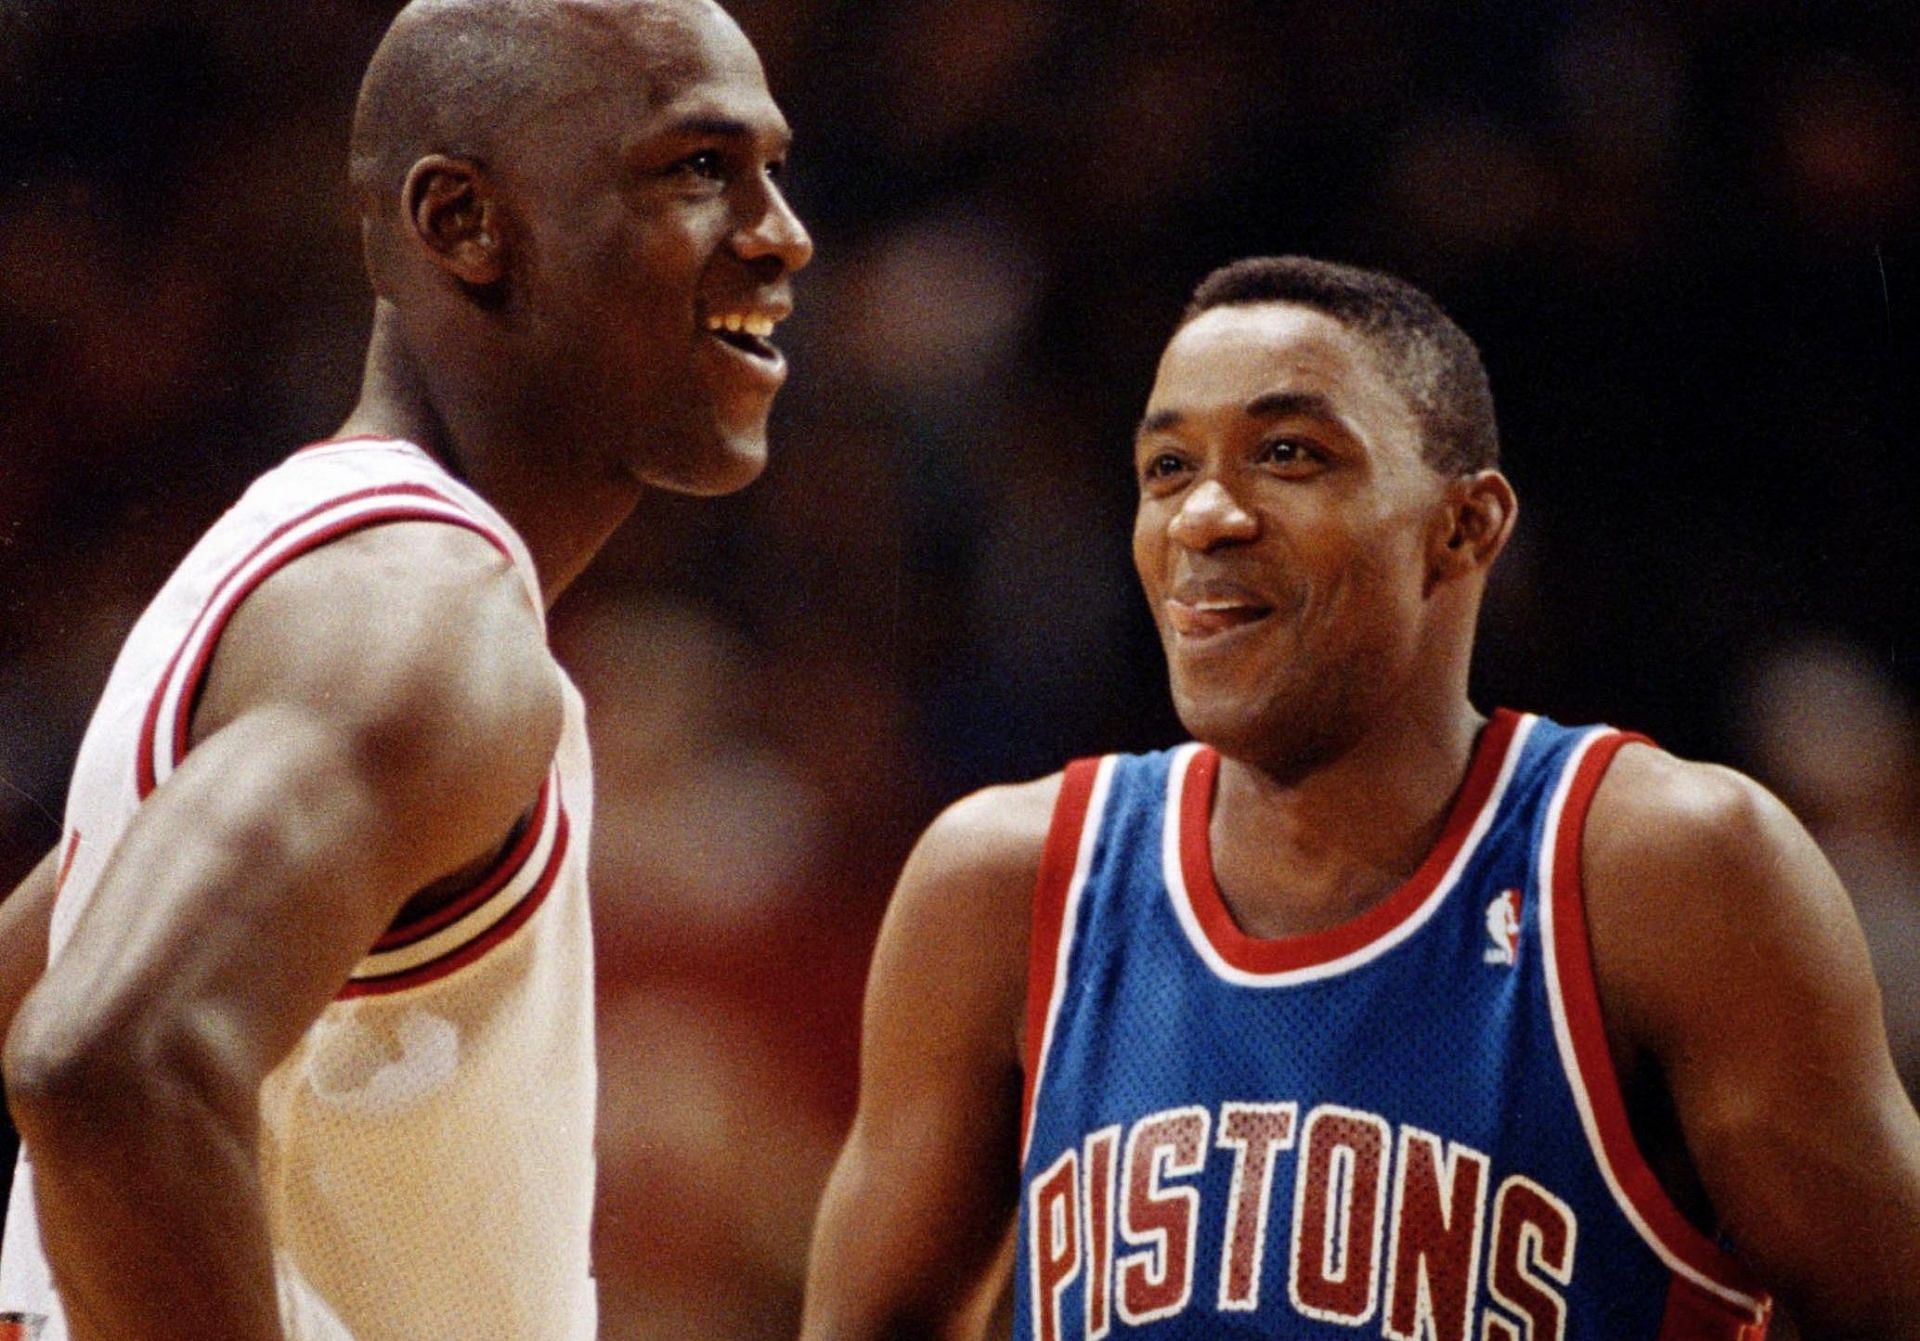 Michael Jordan of the Chicago Bulls and Isiah Thomas of the Detroit Pistons. [Source: USA Today]